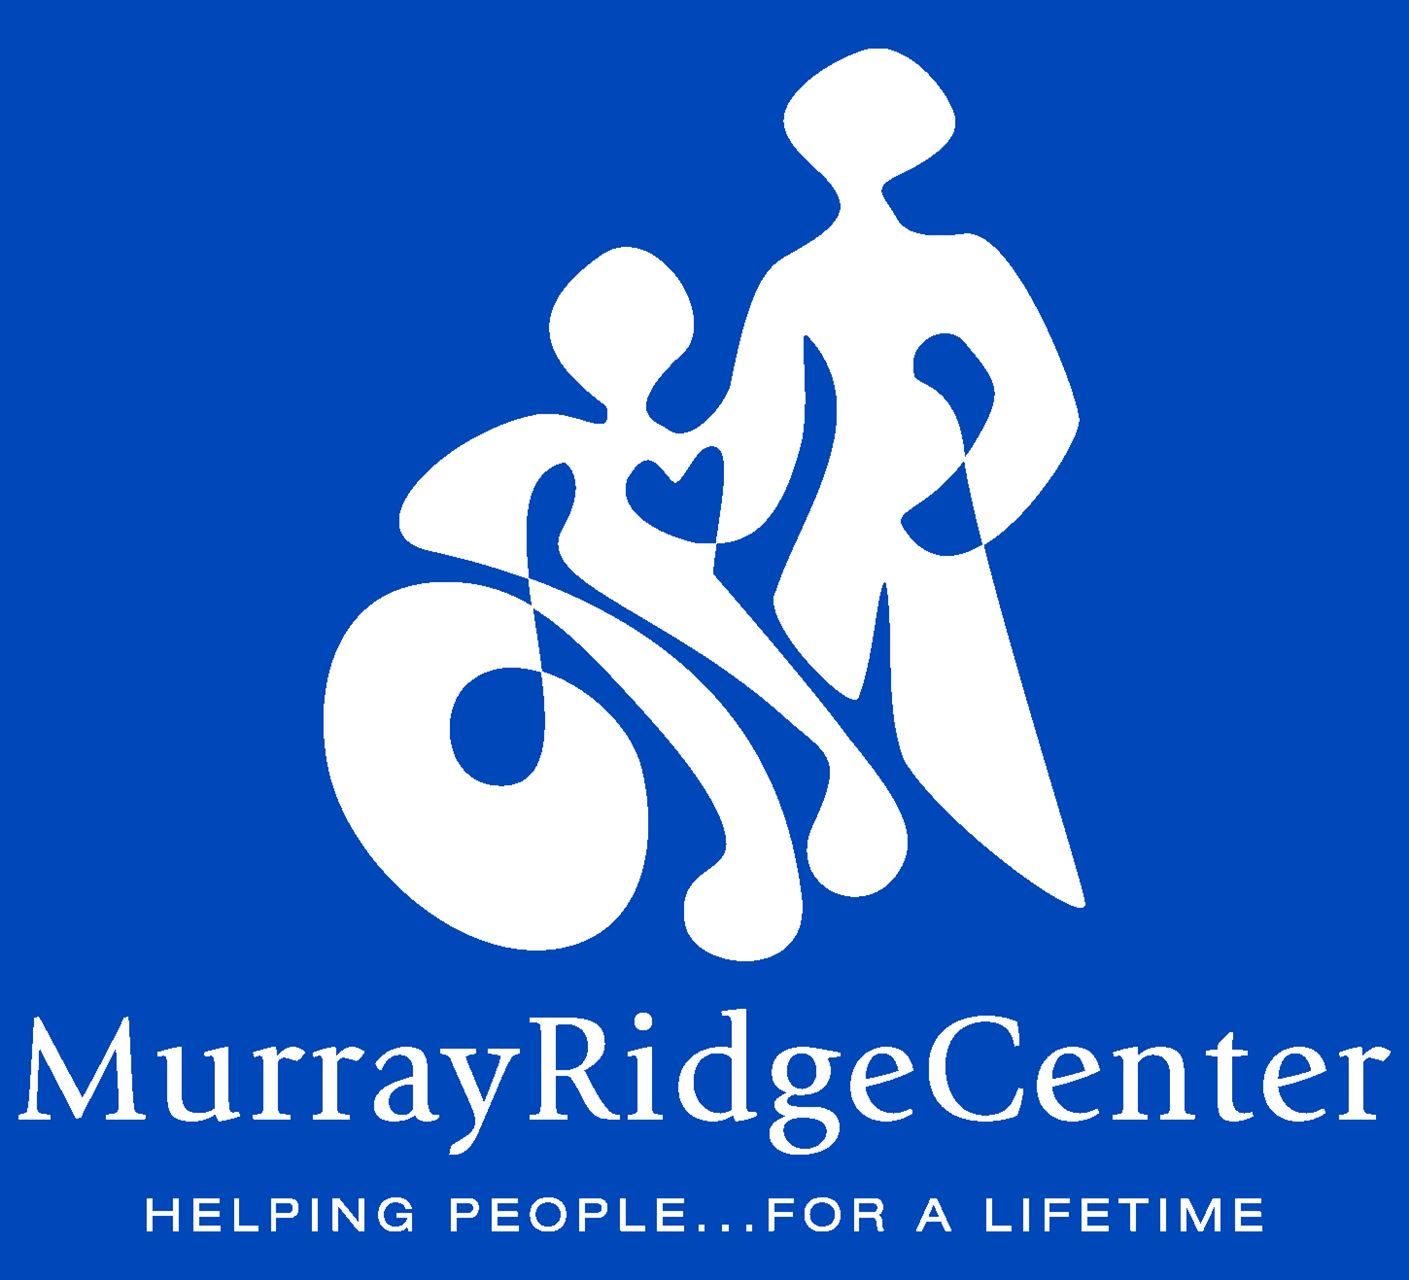 Click to visit the website for the Lorain County Board of Developmental Disabilities (Murray Ridge).